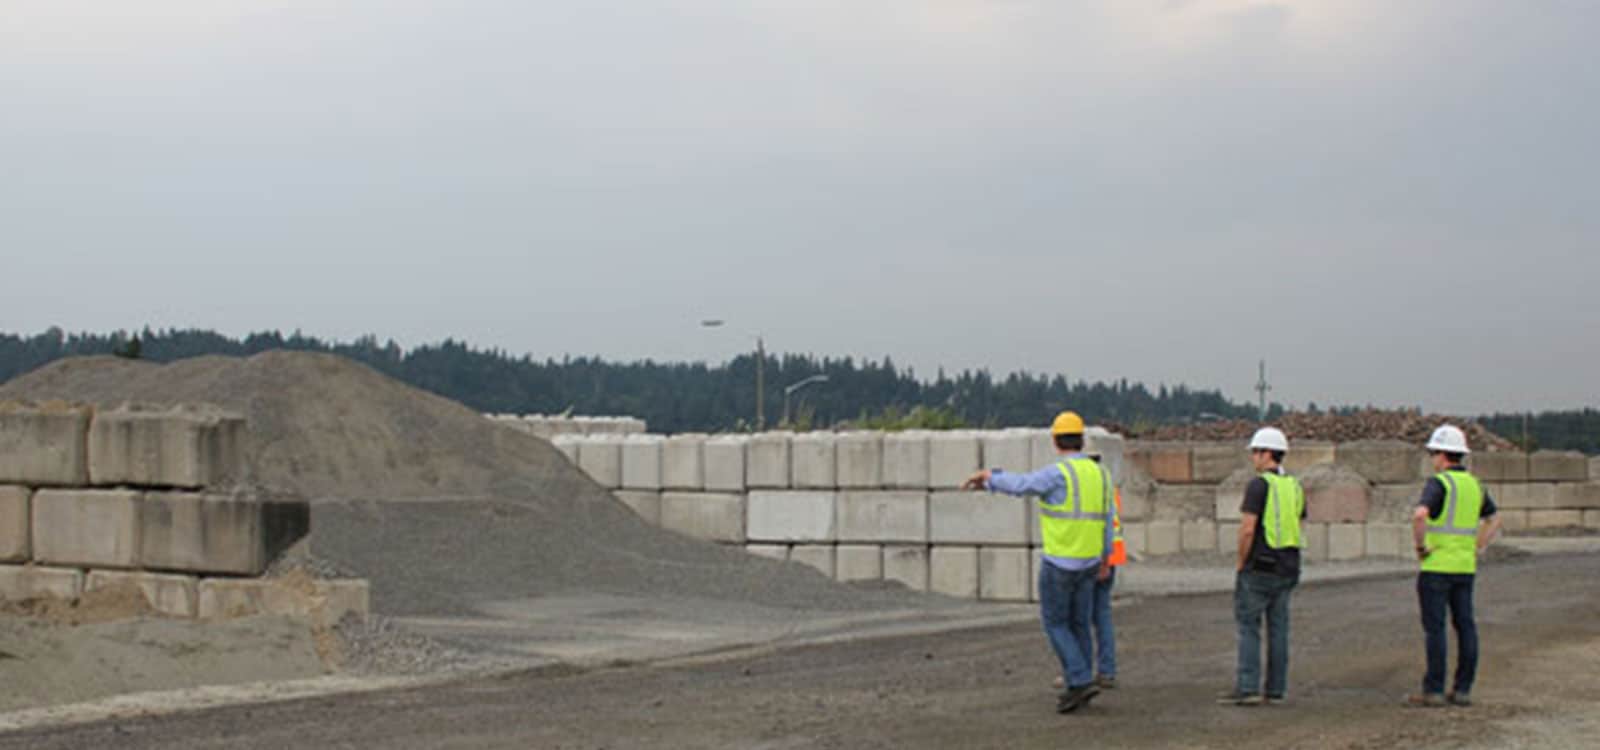 Measuring Bunker Materials with an iPhone | Blog | Stockpile Reports